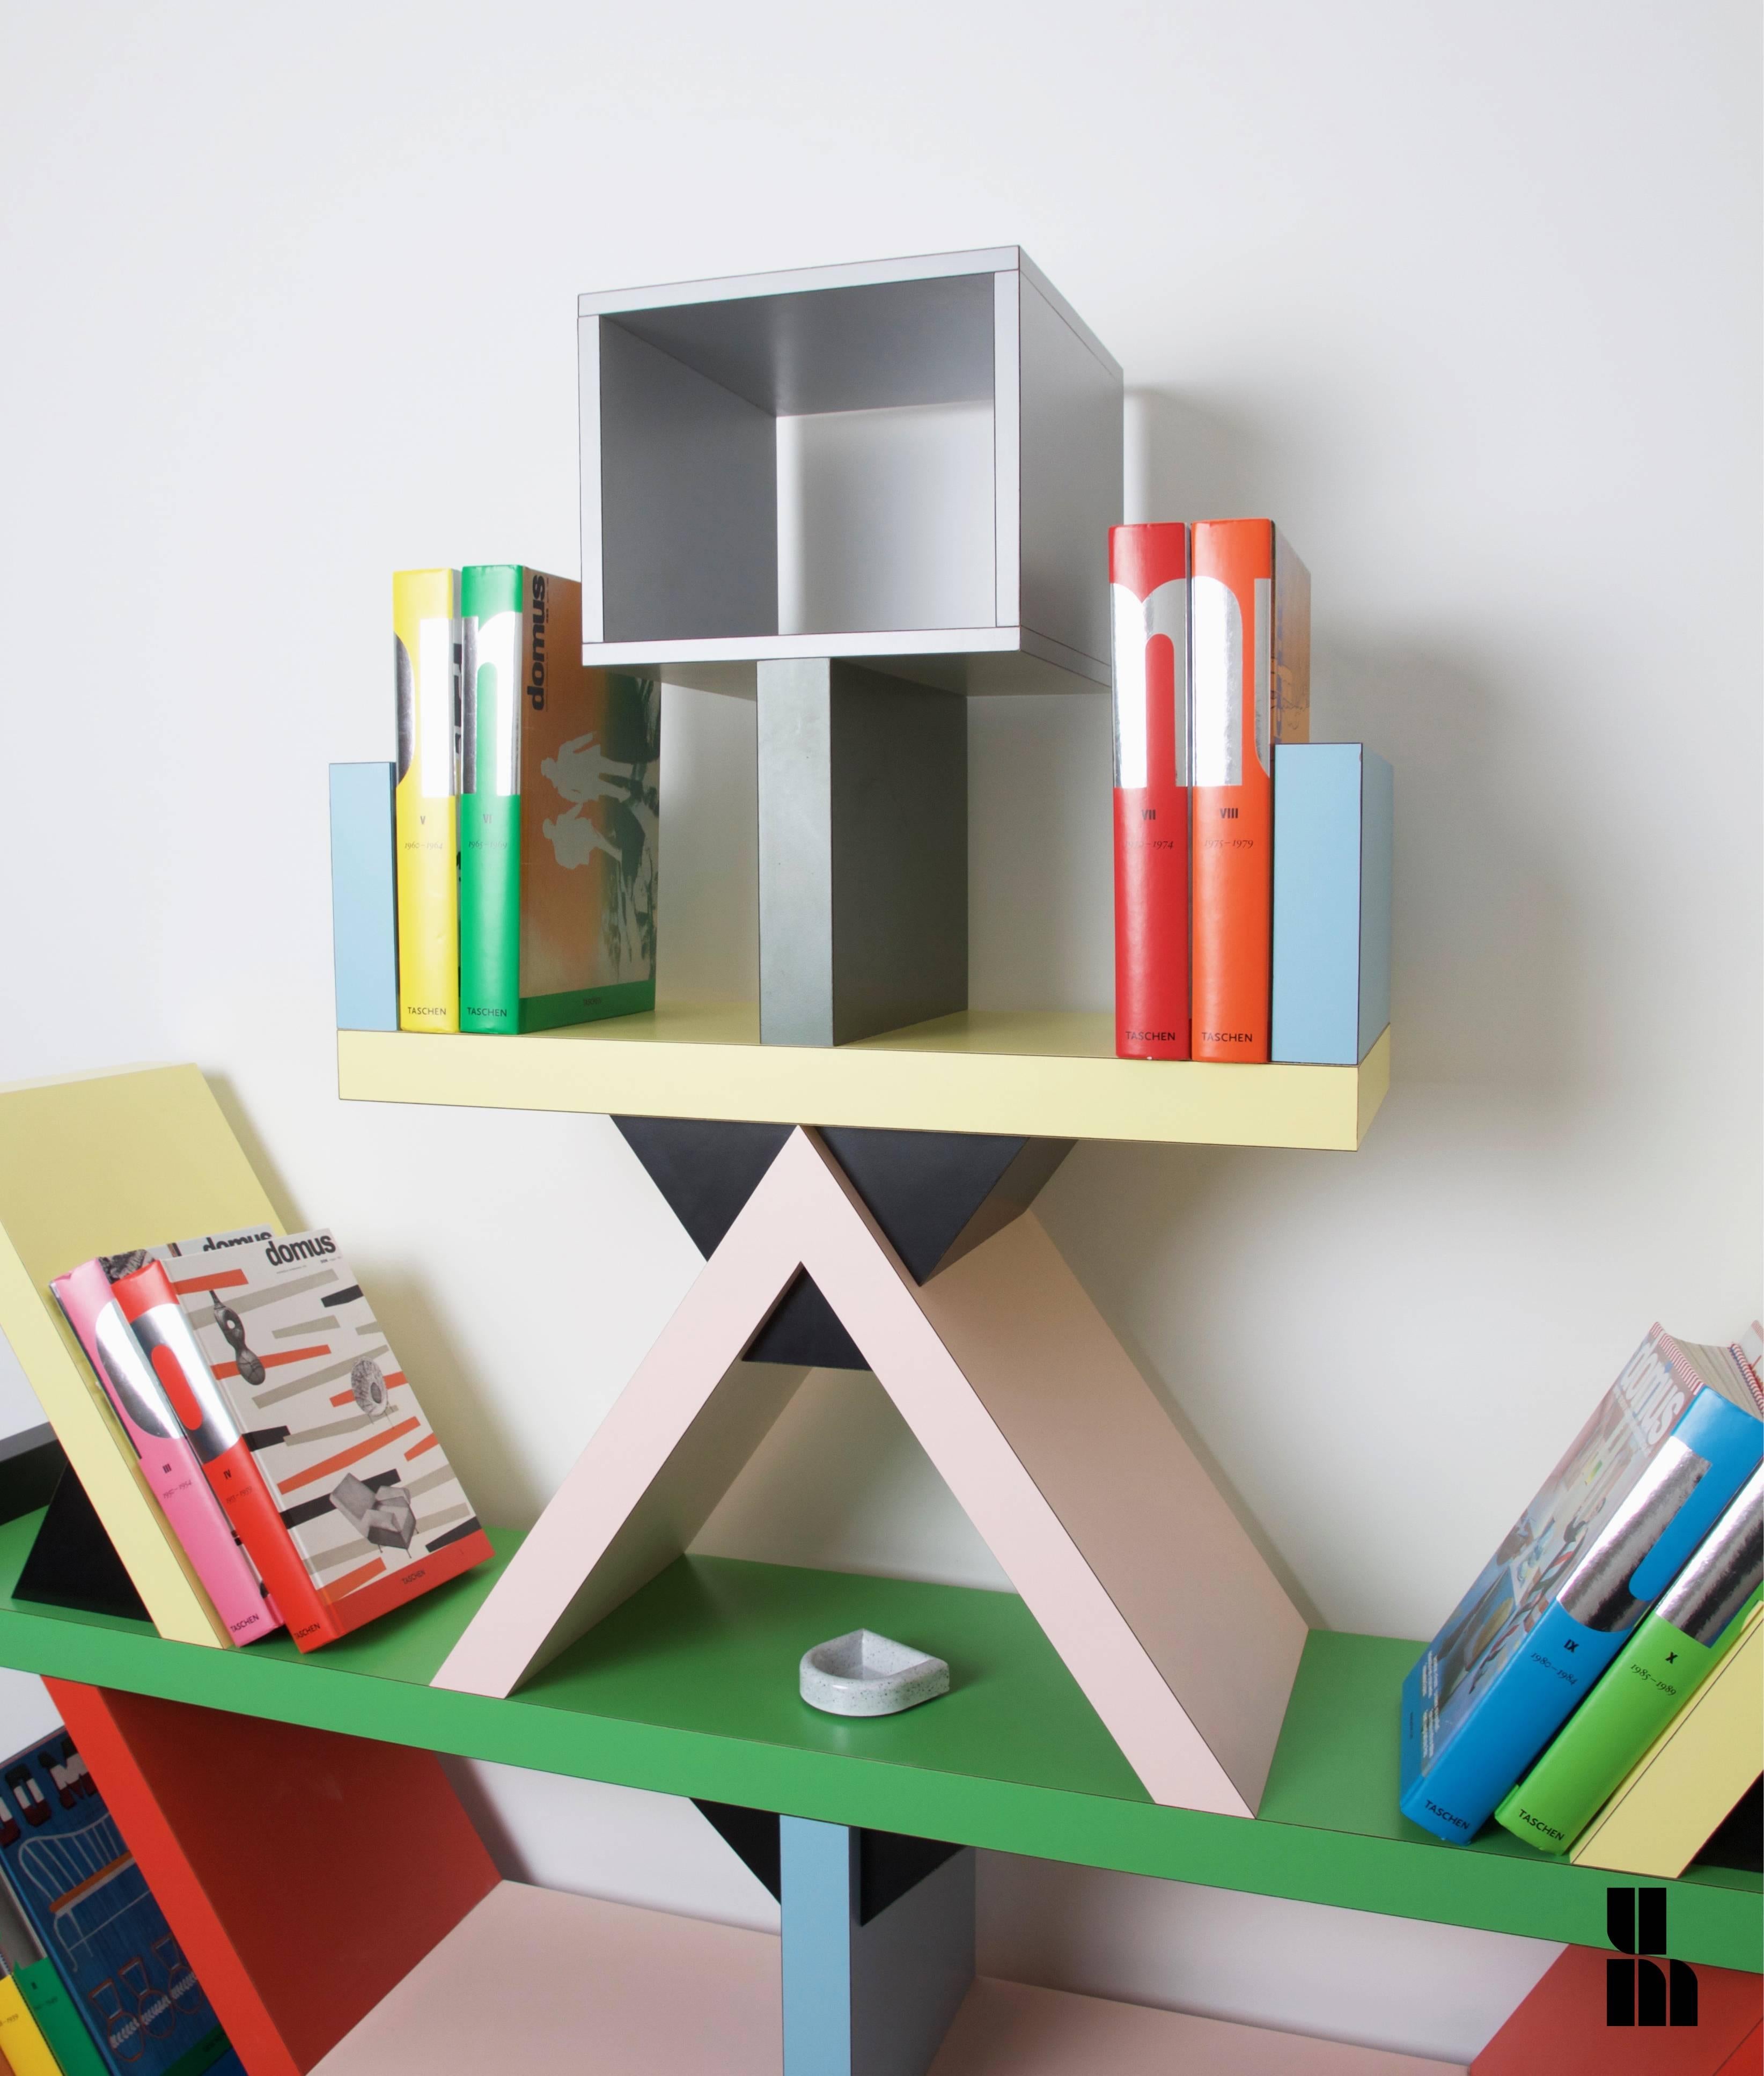 Iconic 'Carlton' bookcase designed by Ettore Sottsass for Memphis Milano in 1981,
Old production manufactured circa 1990.
Near mint original condition with the original Memphis stamp.
Historical museum piece, appears in Moma (New York) collection.